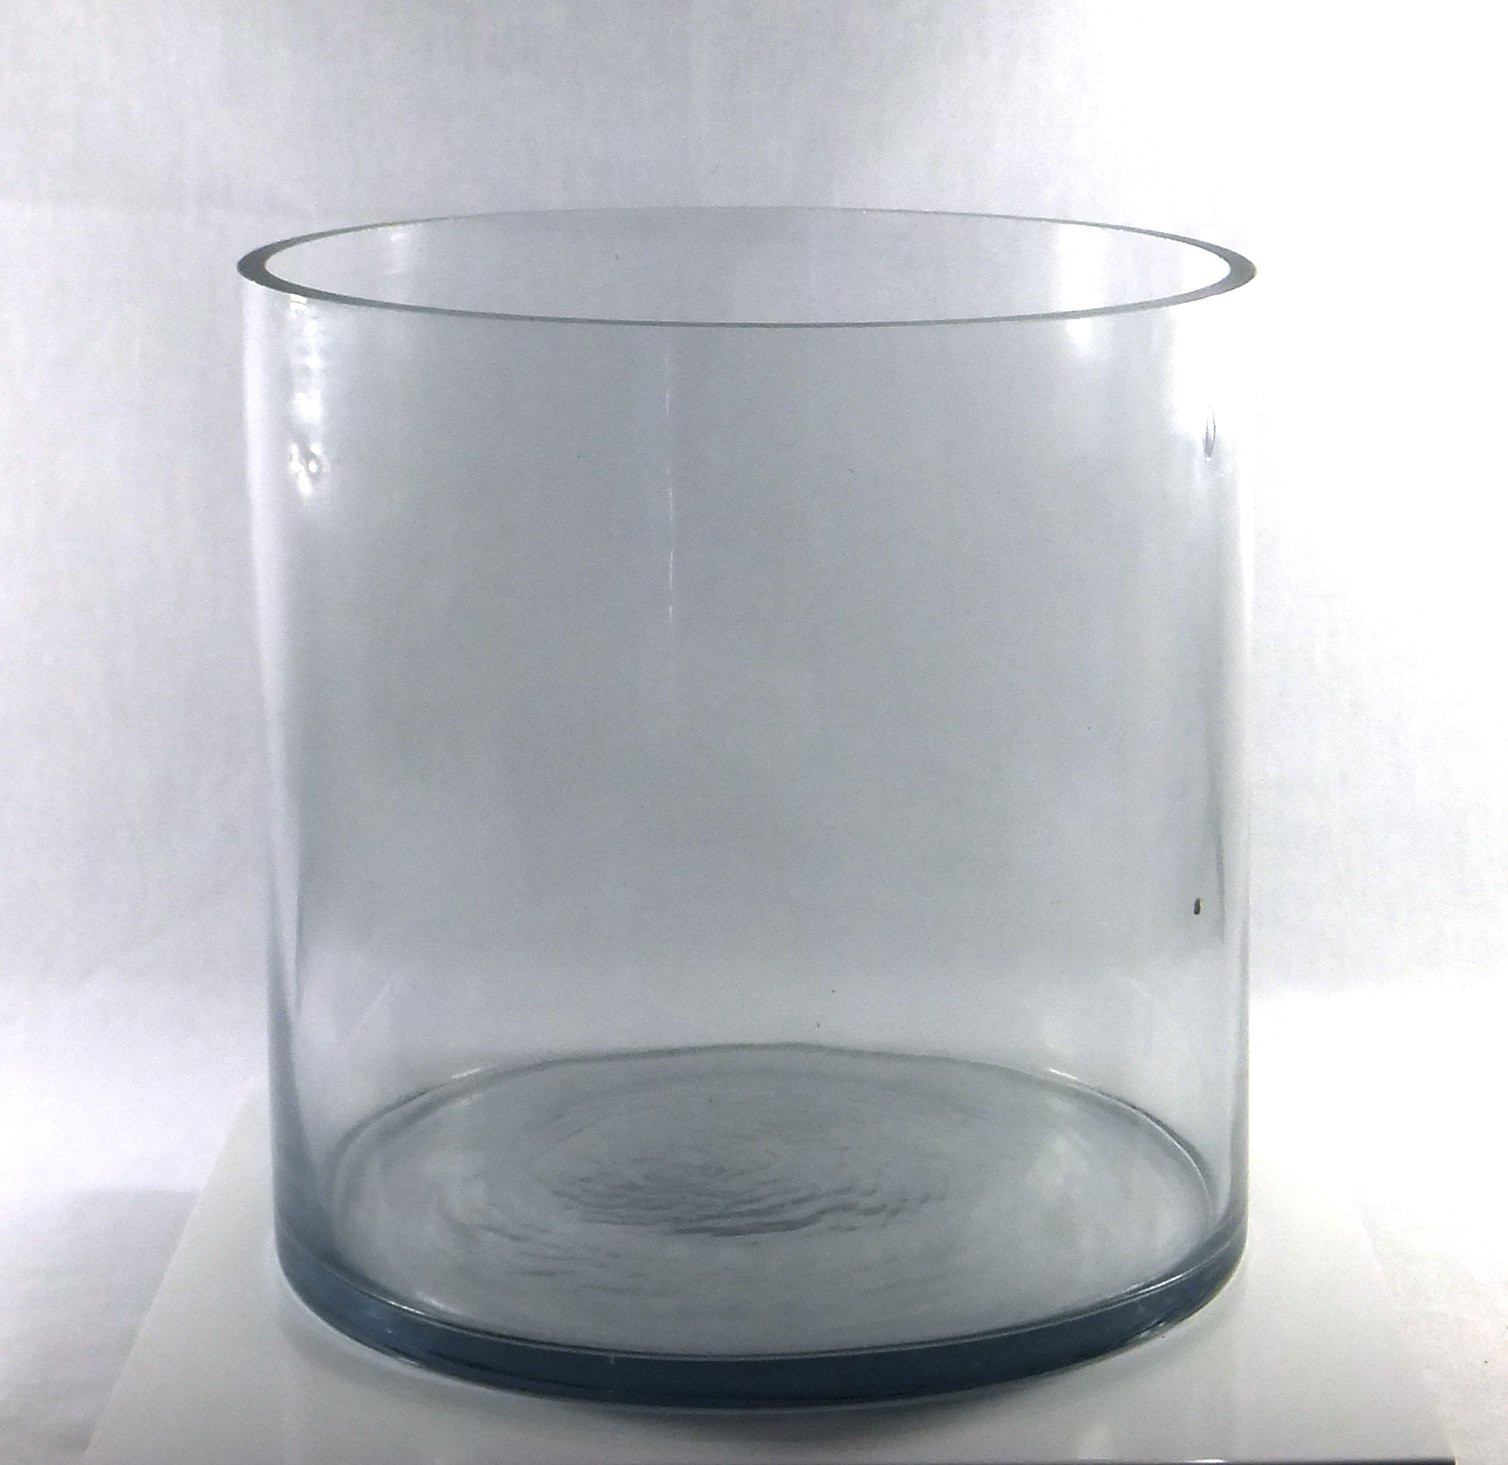 18 Wonderful 36 Inch Tall Glass Vase 2024 free download 36 inch tall glass vase of buy 8 inch round large glass vase 8 clear cylinder oversize with regard to 8 inch round large glass vase 8 clear cylinder oversize centerpiece 8x8